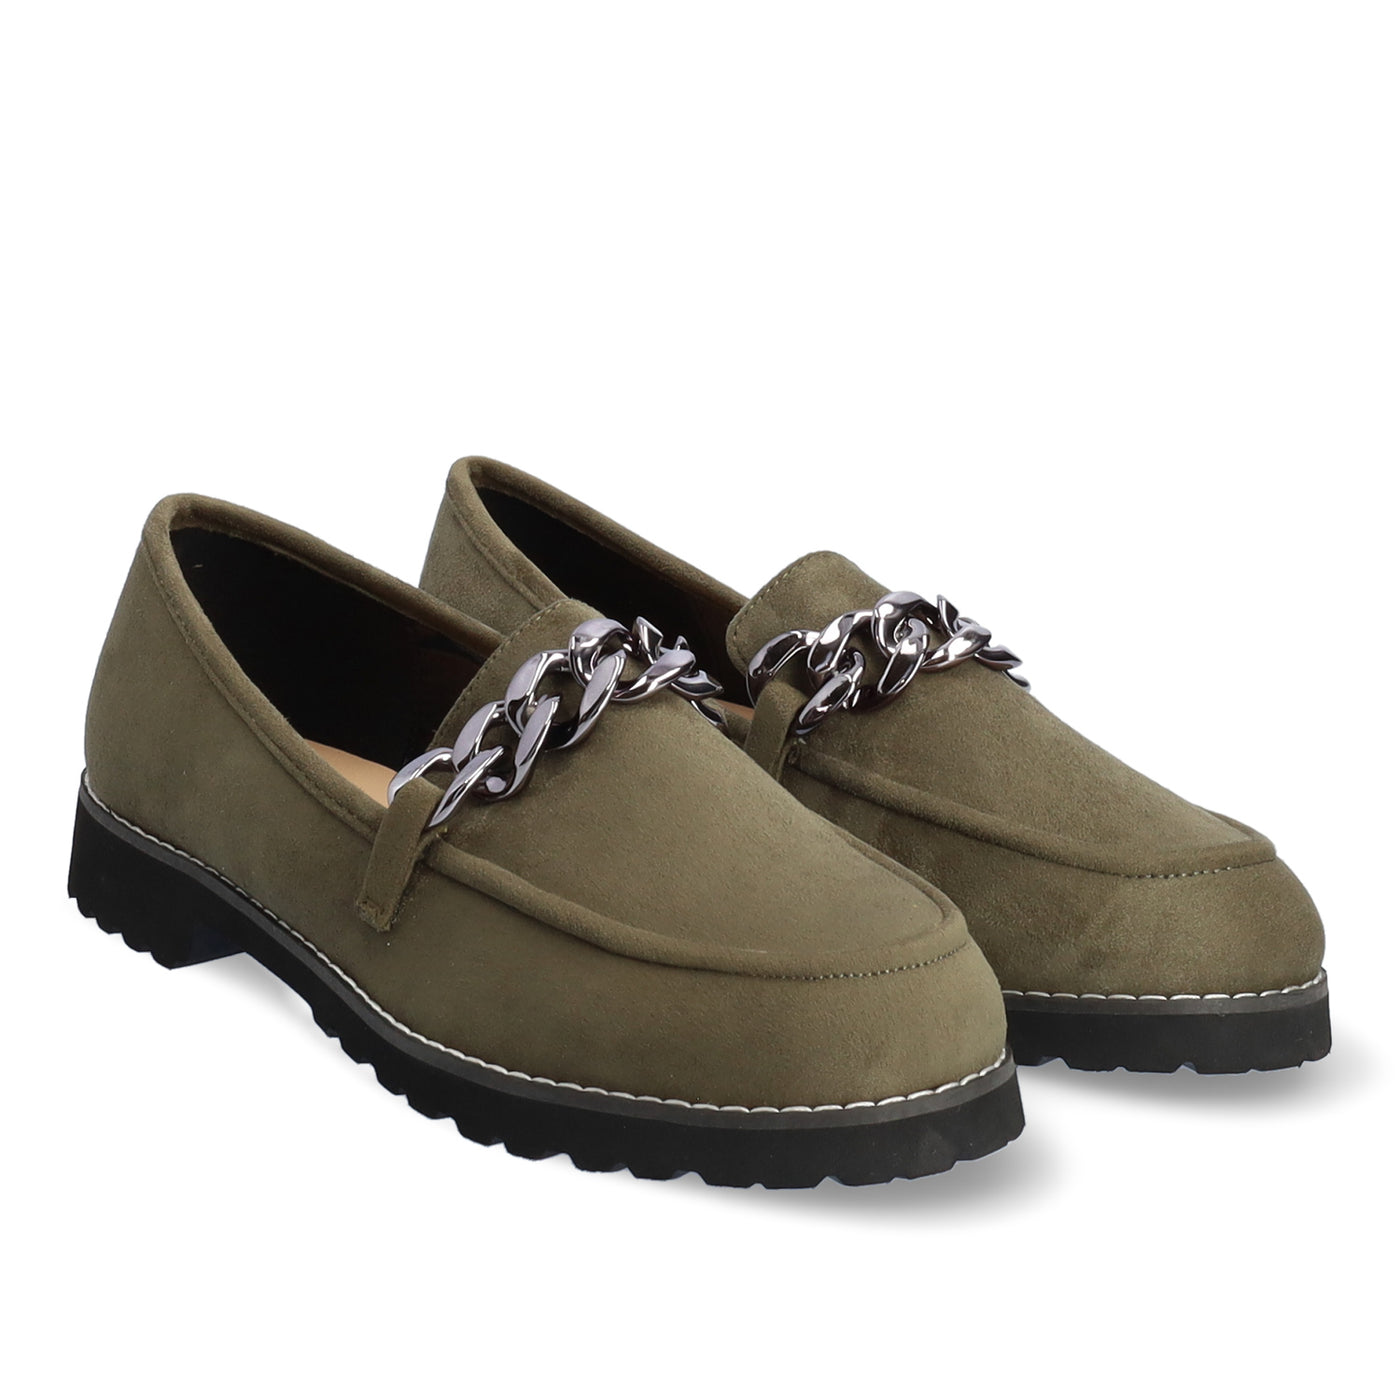 Loafers in Khaki Faux Suede